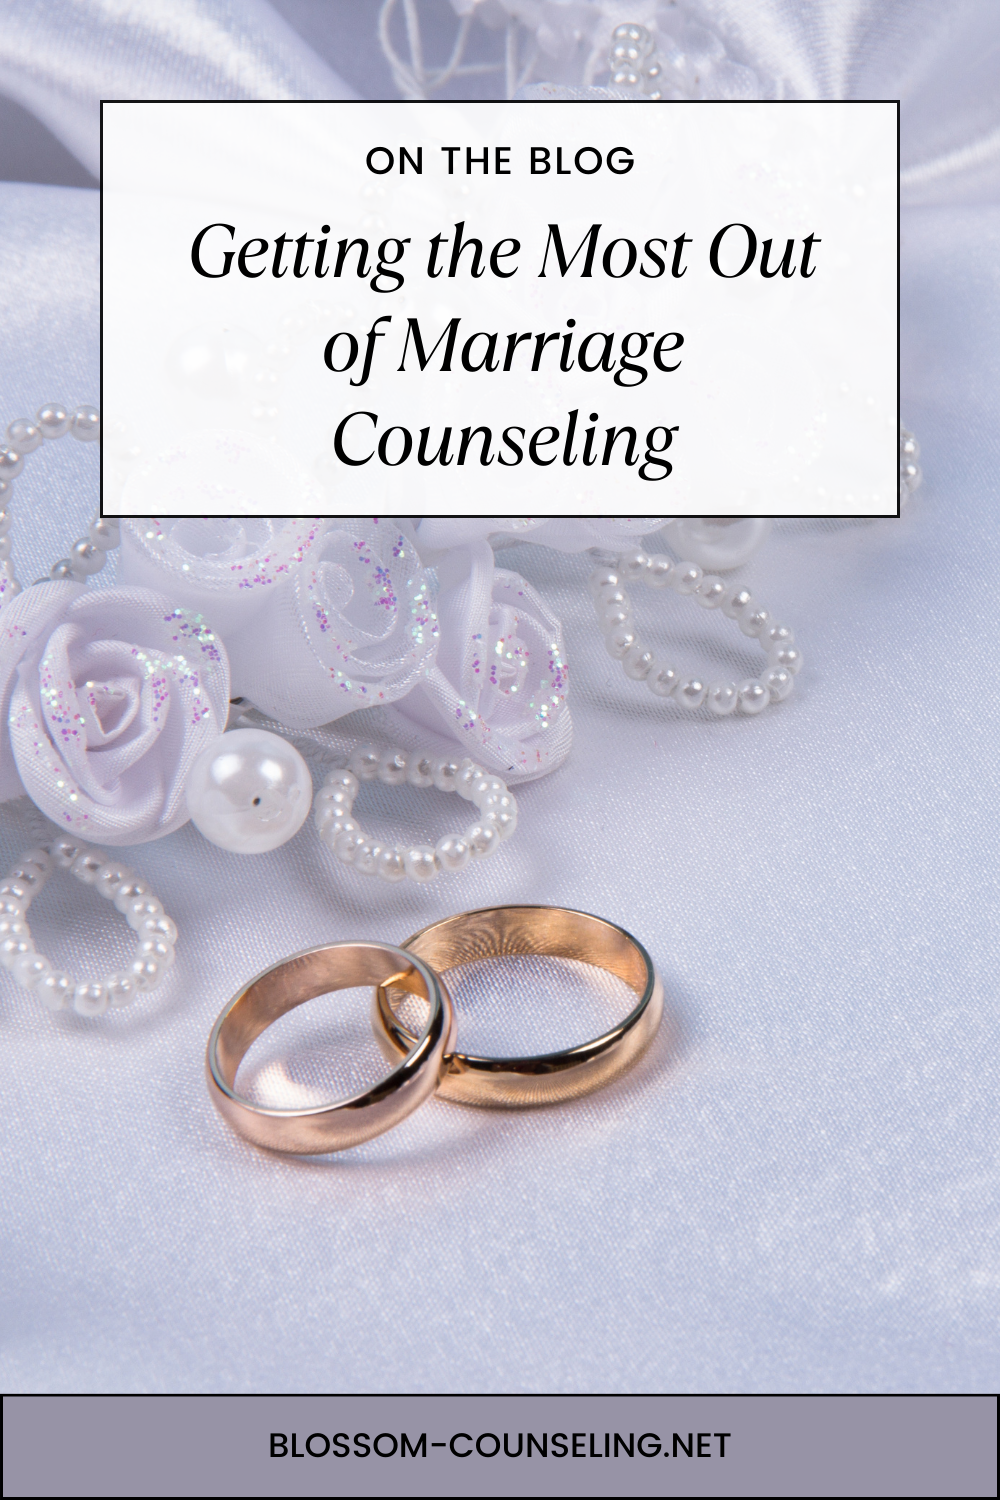 Getting the Most Out of Marriage Counseling